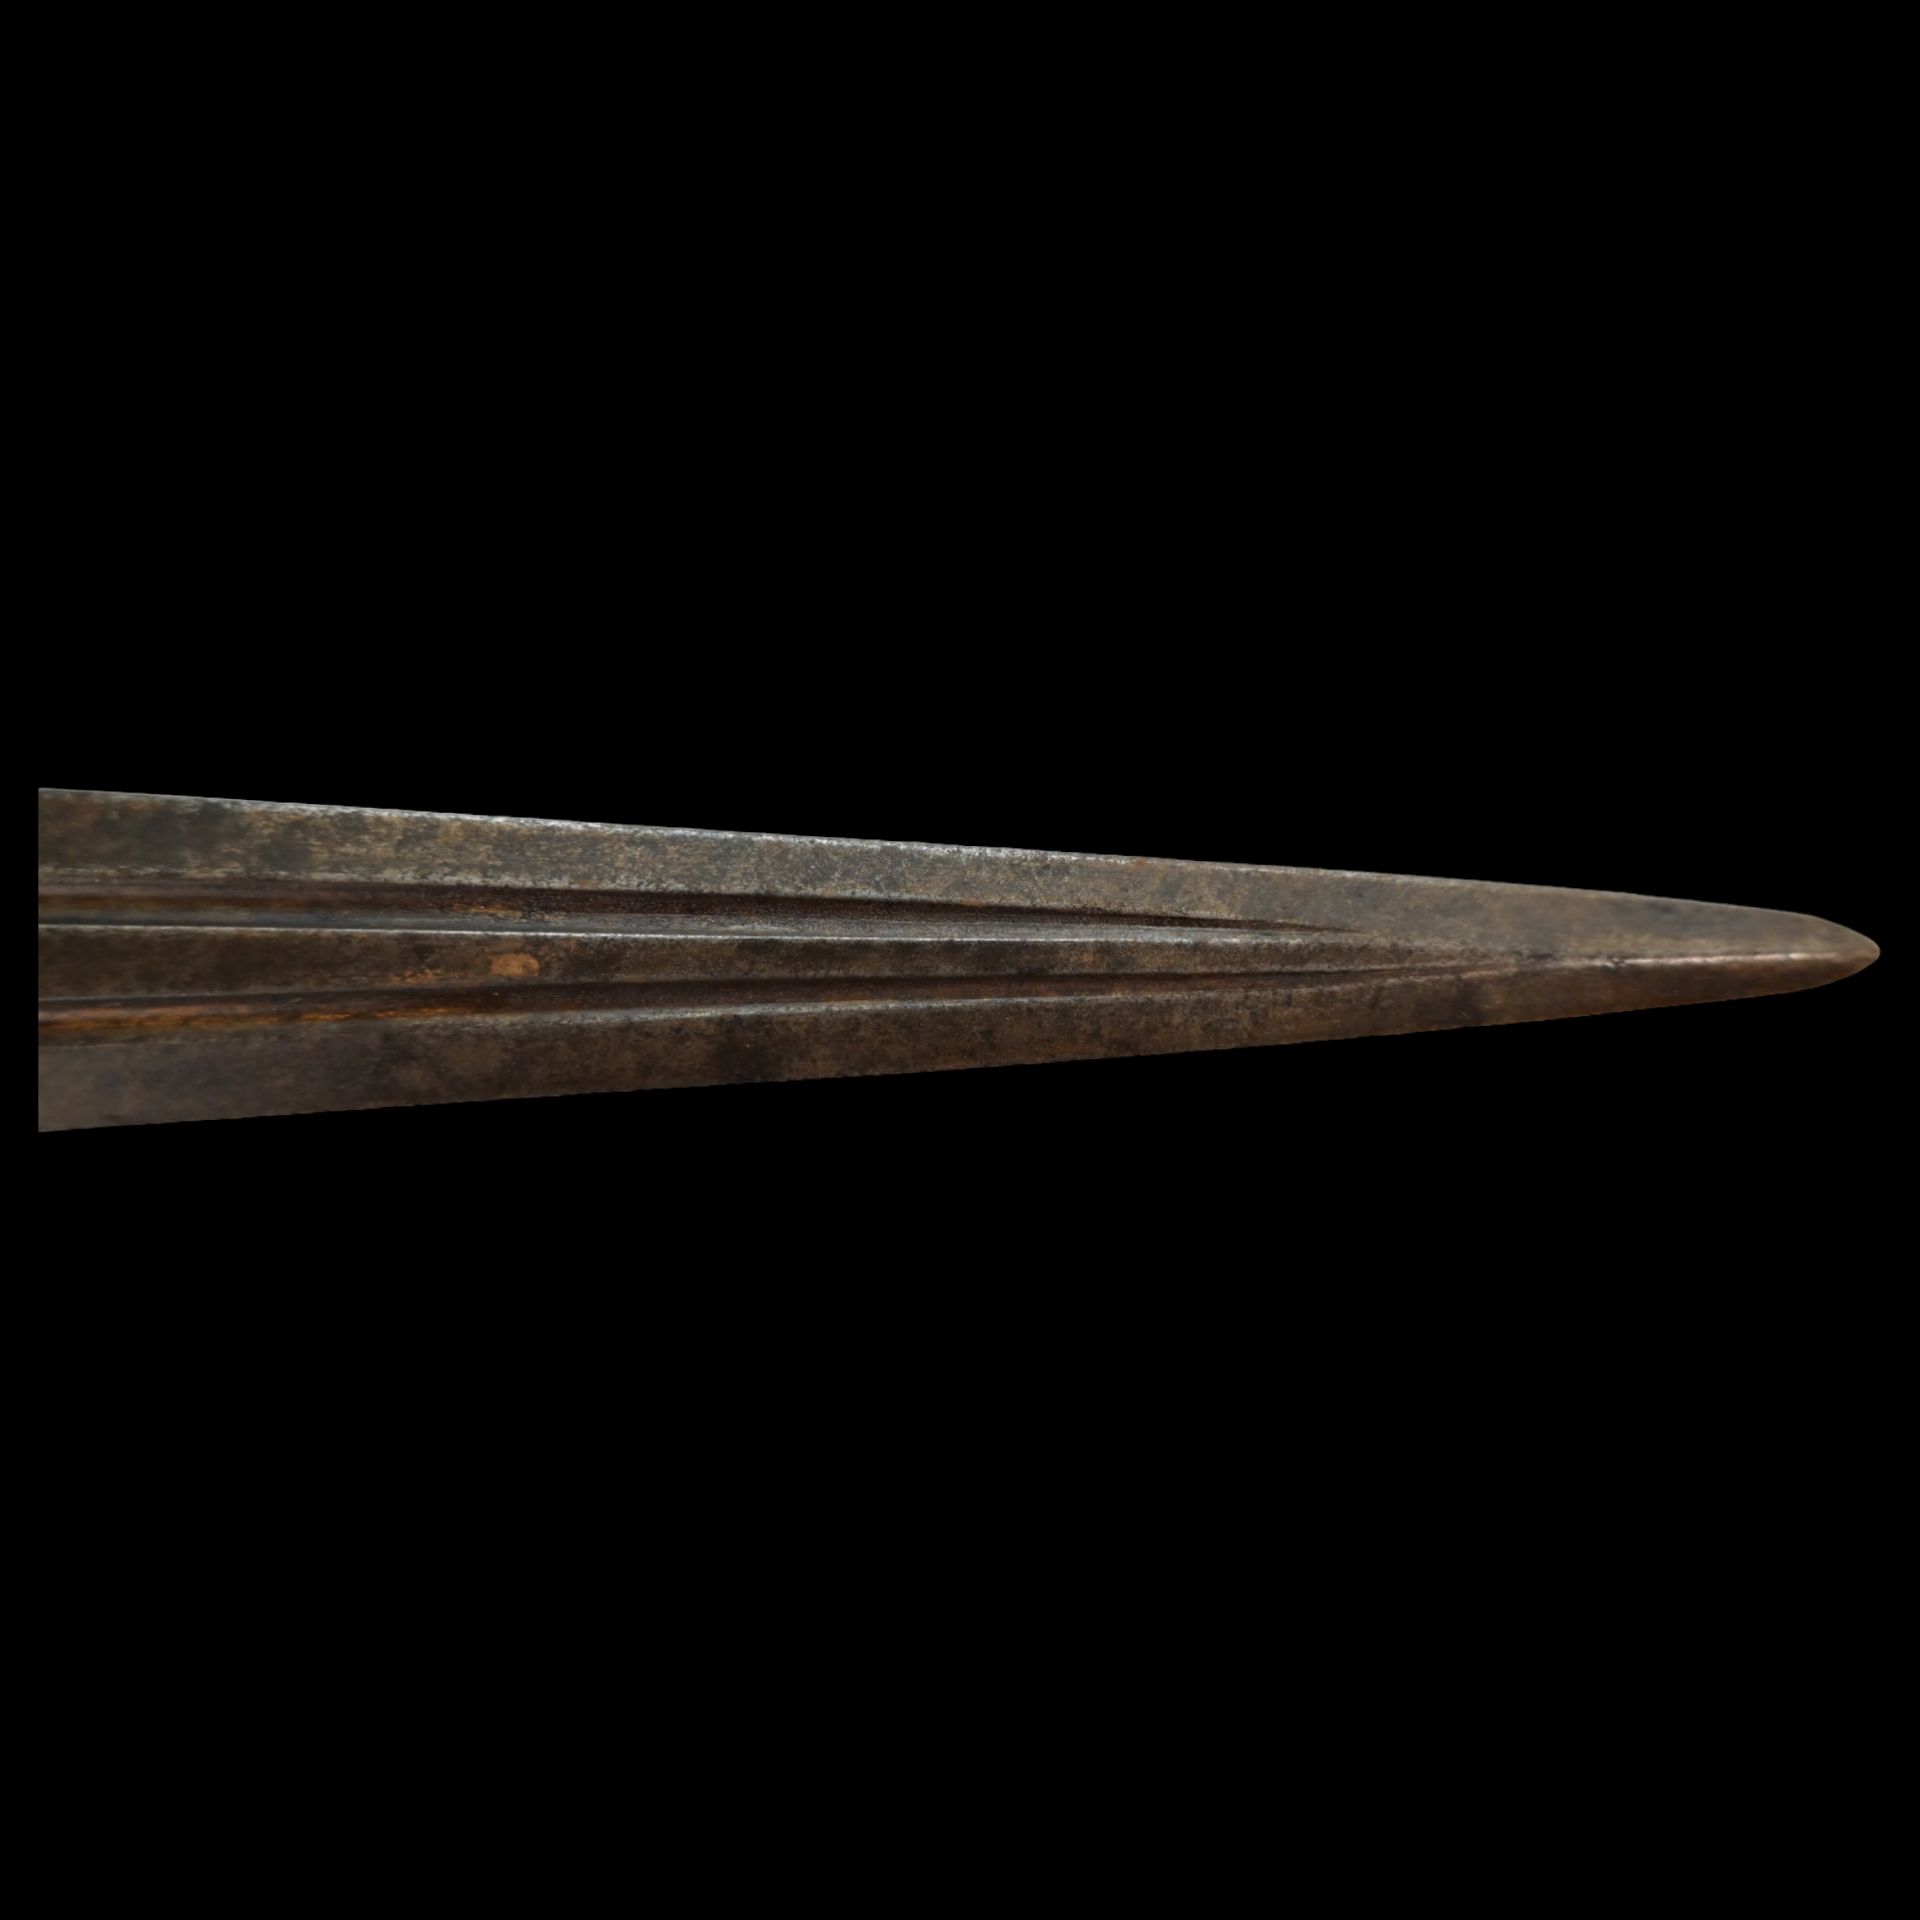 Very rare medieval dagger in excellent condition, France, 15th-16th century. - Image 8 of 11